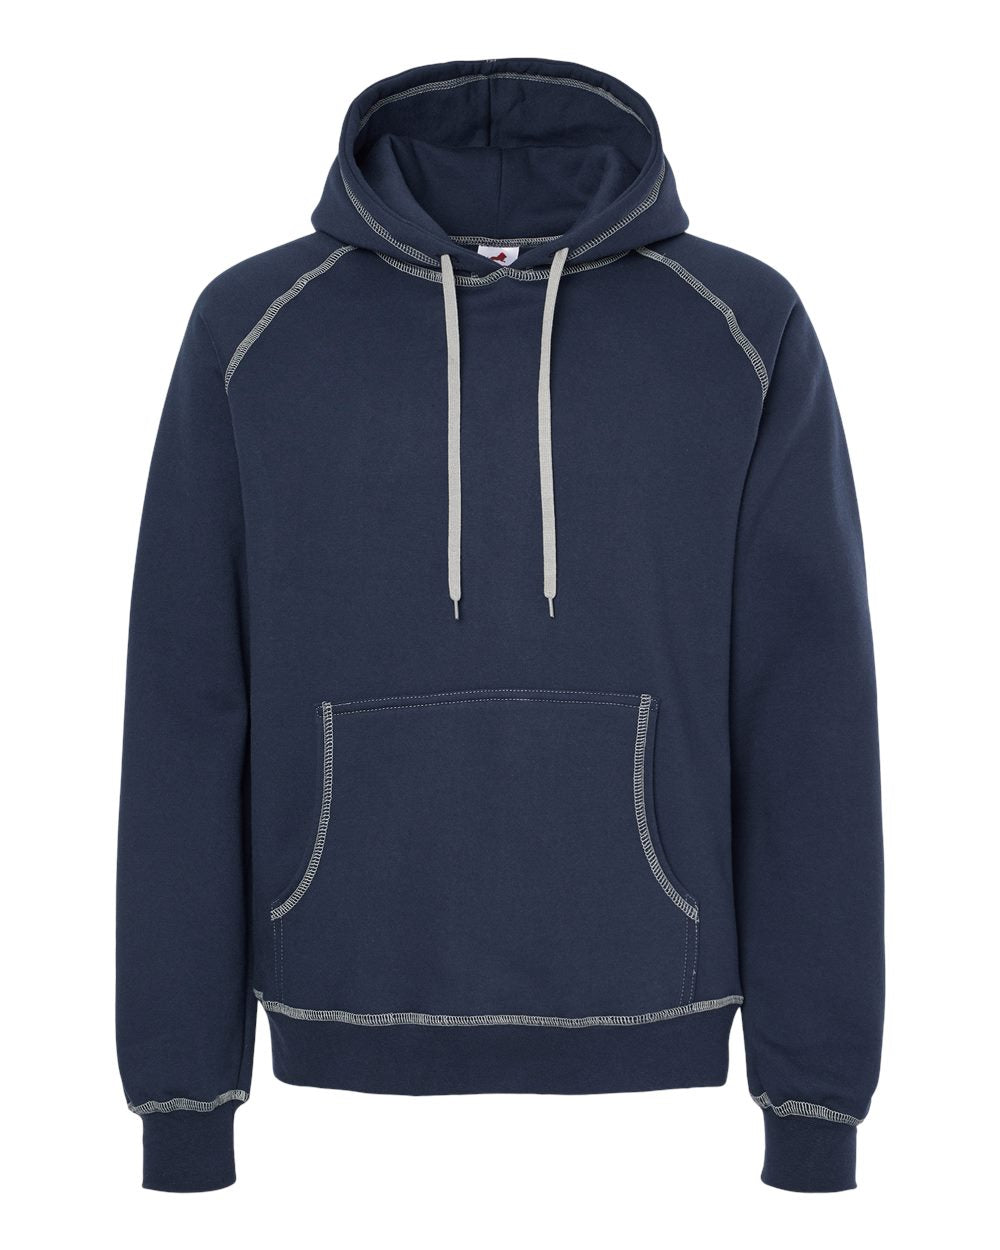 King Fashion Extra Heavy Hooded Pullover KP8011 #color_Navy